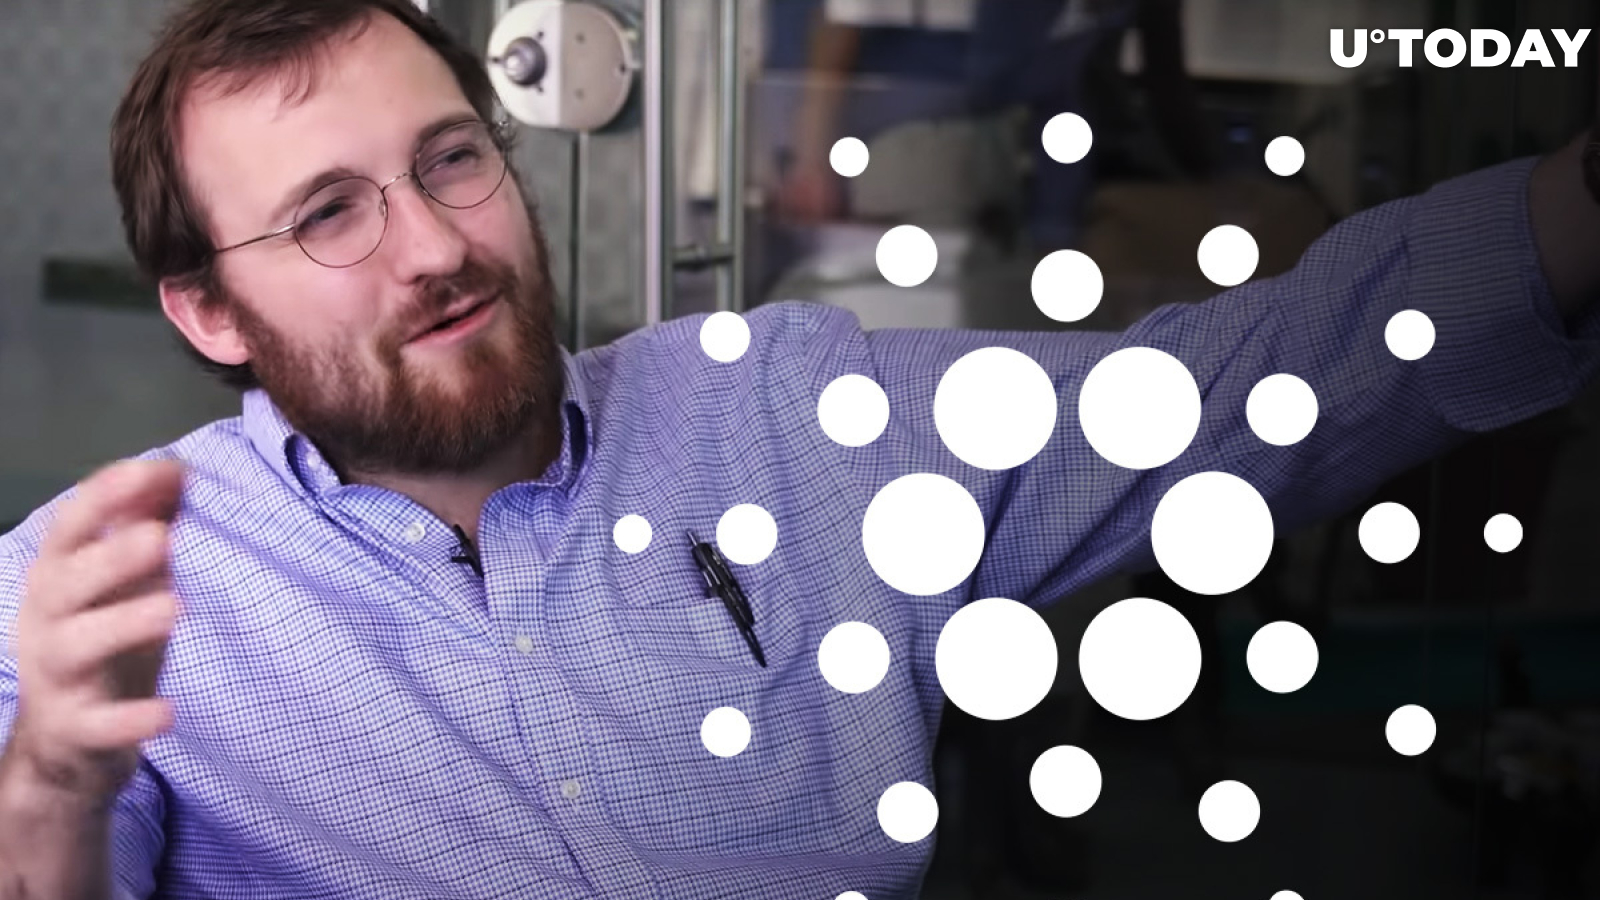 Charles Hoskinson Claims There Are "Thousands" of Assets on Cardano in Response to Criticism